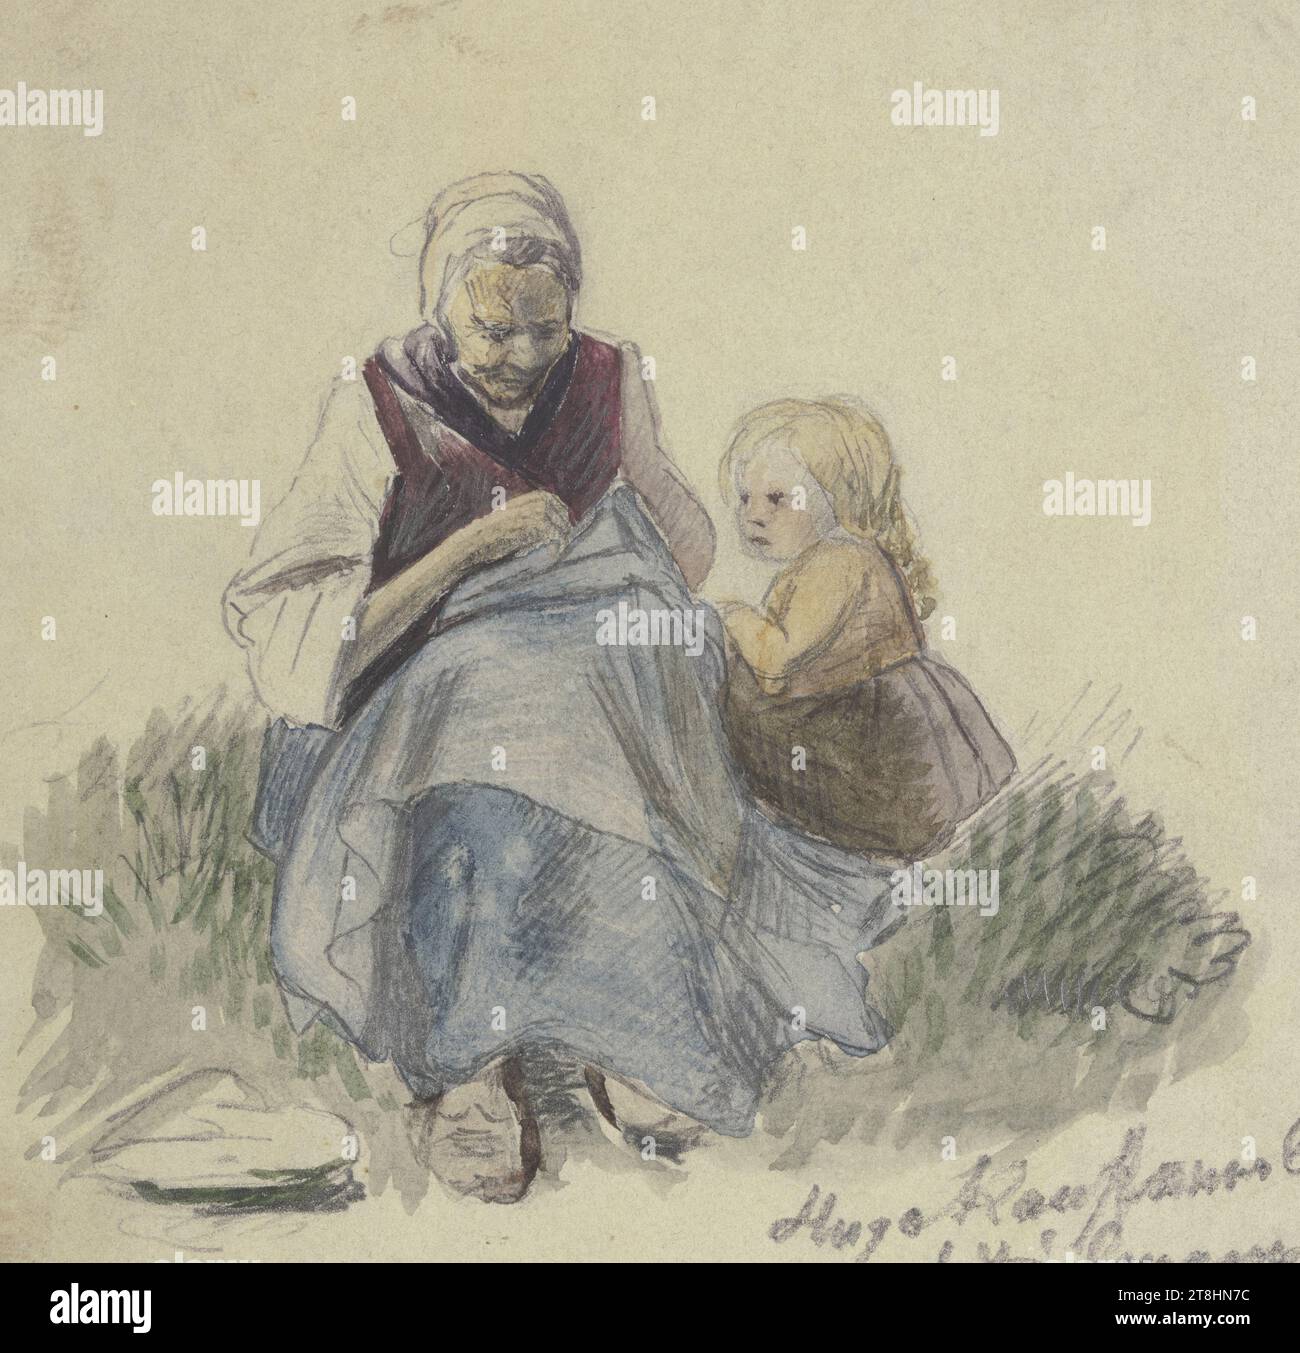 HUGO KAUFFMANN, after JAKOBFürchtegott DIELMANN, grandmother, sewing, and child, 1860, sheet, 74 x 76 mm, pencil and watercolor on vellum paper, drawn on rag cardboard, grandmother, sewing, and child, HUGO KAUFFMANN, inventor, after JAKOBFürchtegott DIELMANN, 19TH CENTURY, DRAWING, pencil and watercolor on vellum paper, drawn on ragboard, GRAPHITE-CLAY MIXTURE, WATERCOLOR, VELVET PAPER, PENCIL DRAWING, WATERCOLOR, BRUSH DRAWING, GERMAN, COPY, Signed, dated and inscribed lower right, in pencil, Hugo Kauffmann 60 / according to Dielmann Stock Photo